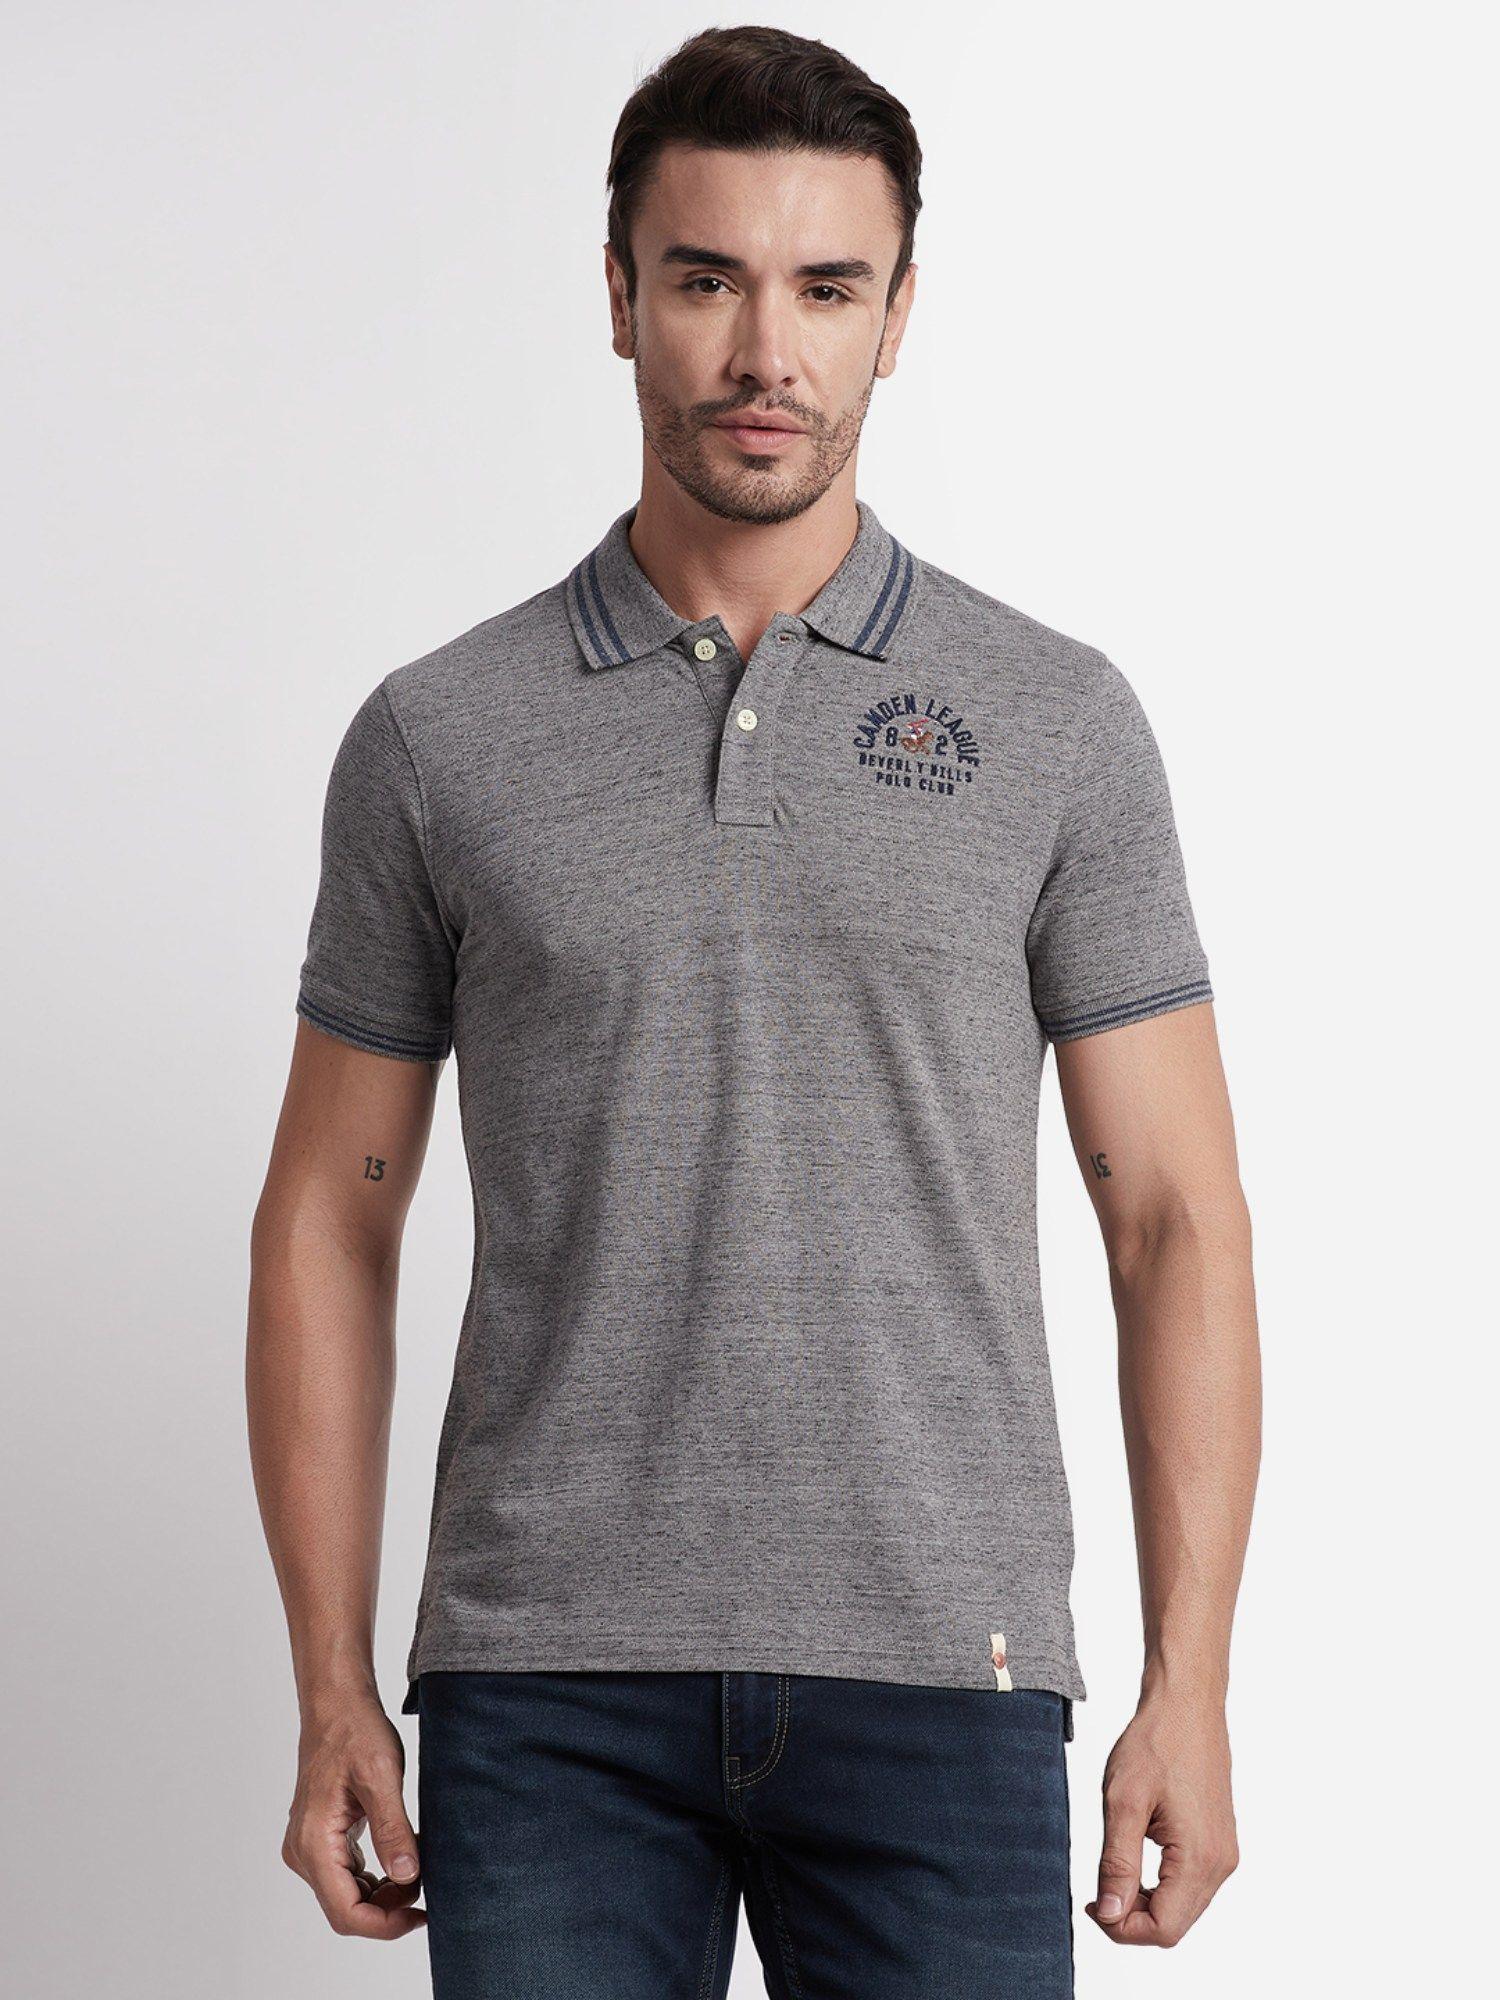 speckled knit grey polo t-shirt